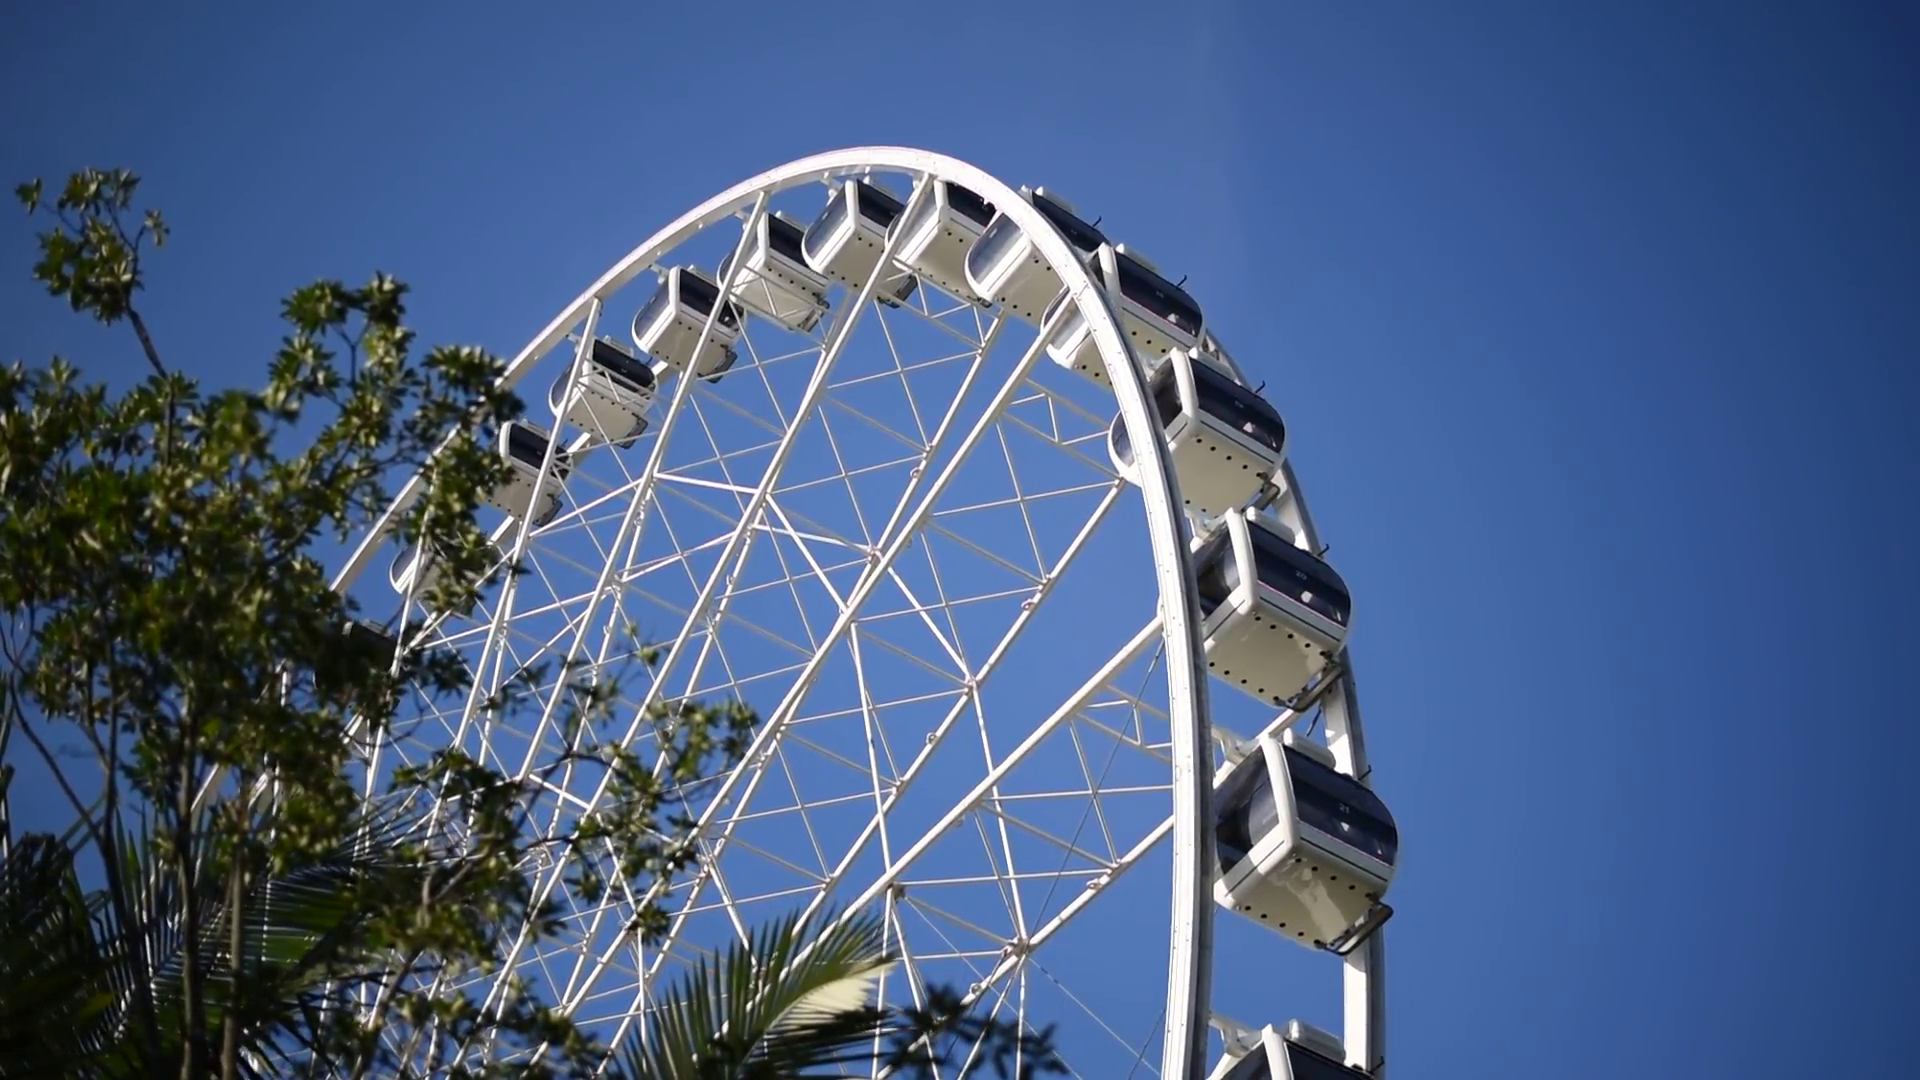 A side view of a big white Ferris wheel on a blue sky without cloud ...